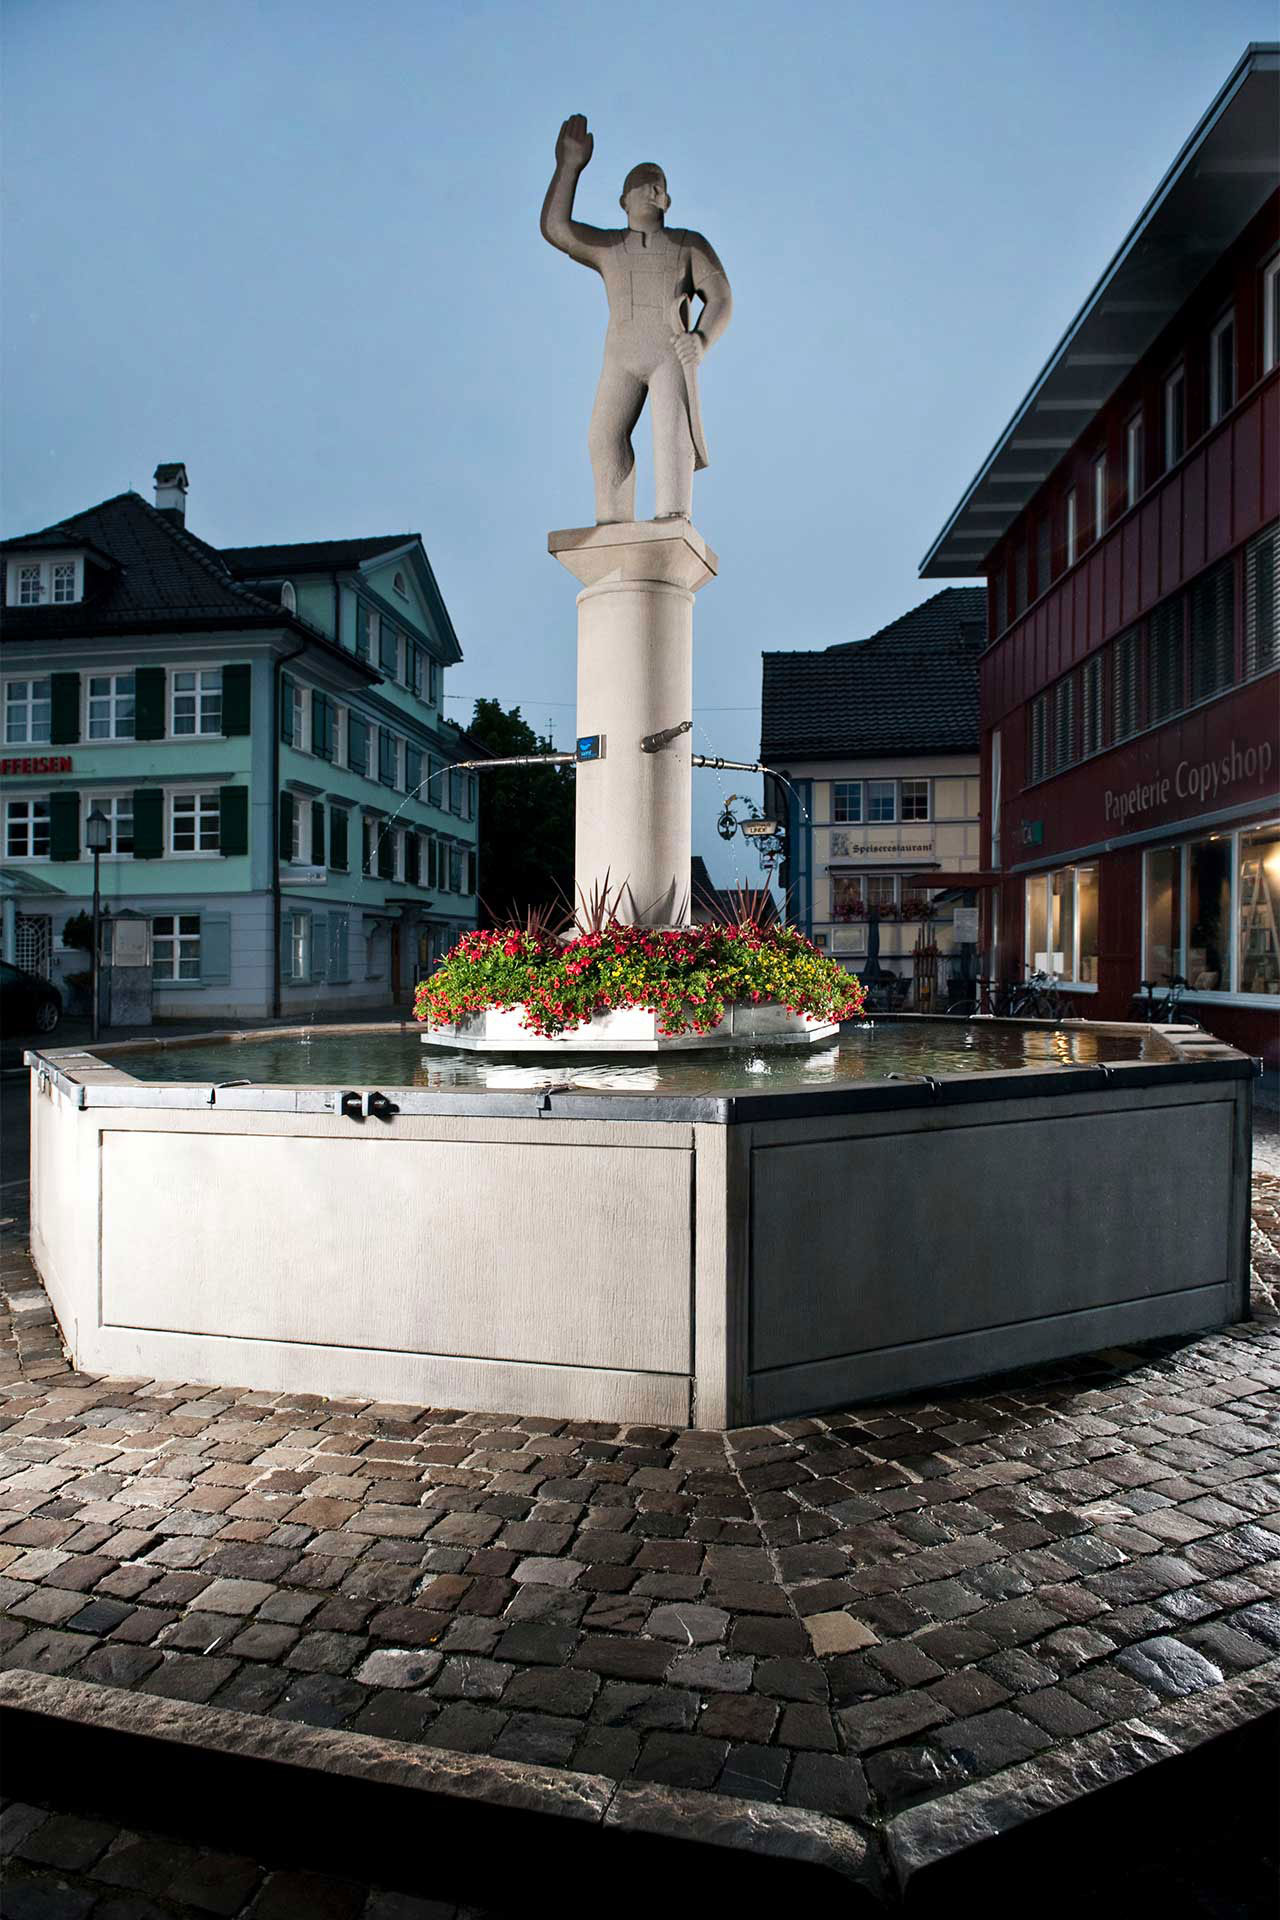 Wells in Appenzell